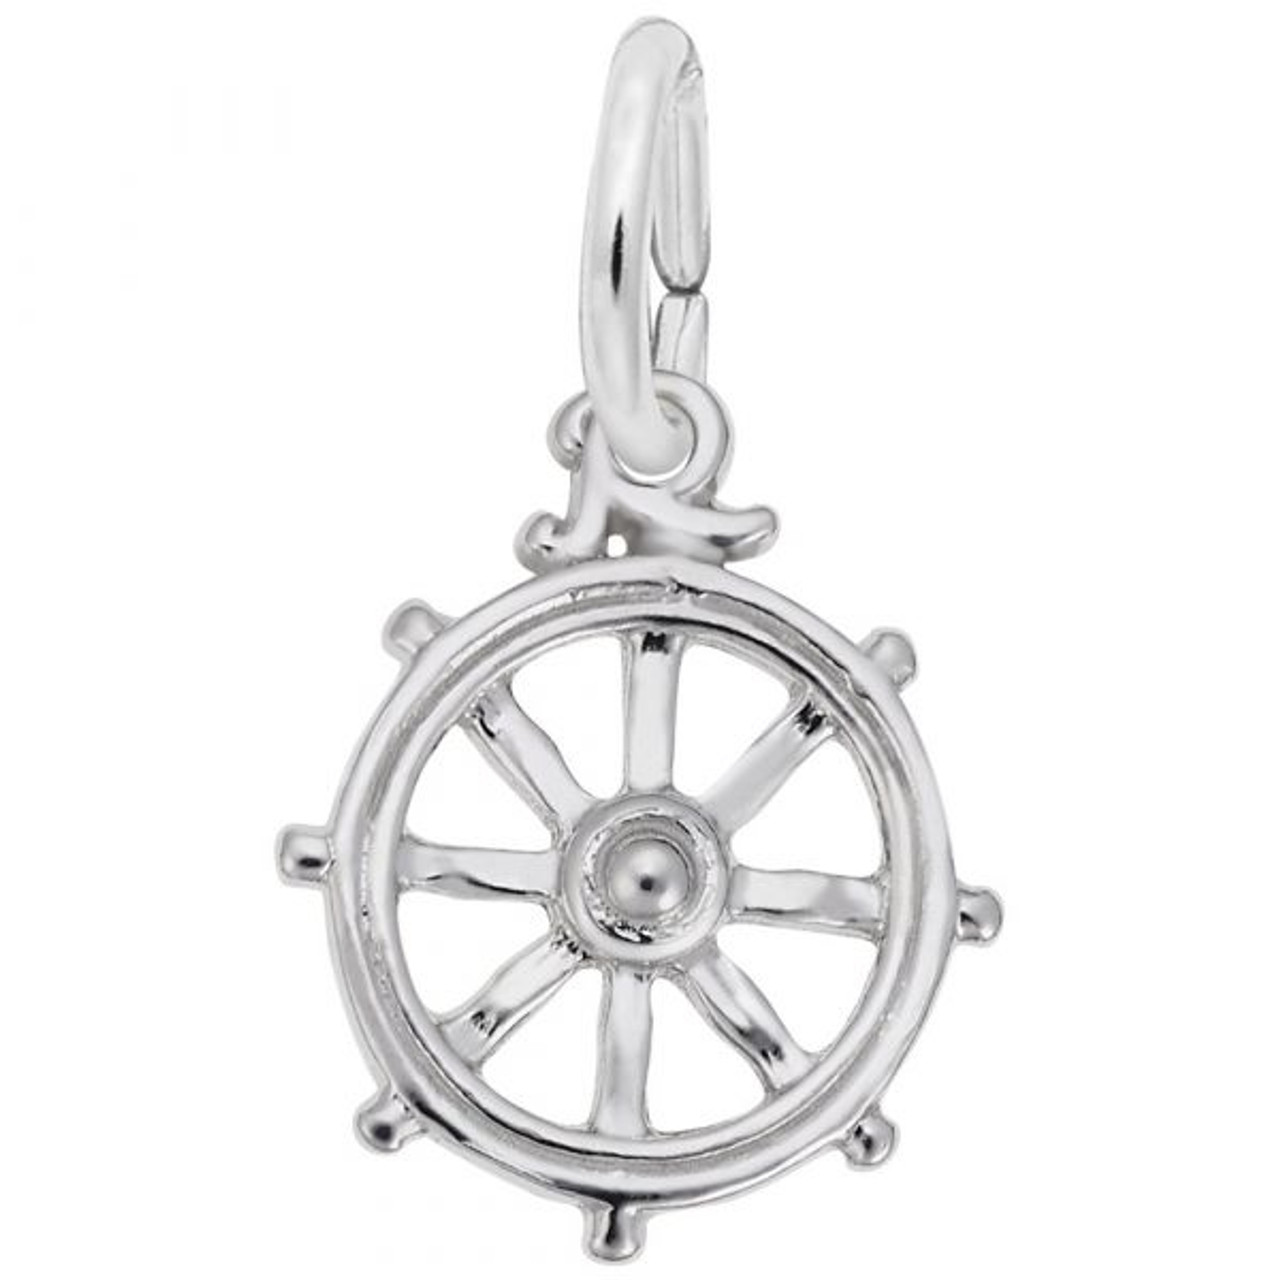 Ship Wheel Charm - Sterling Silver and 14k White Gold